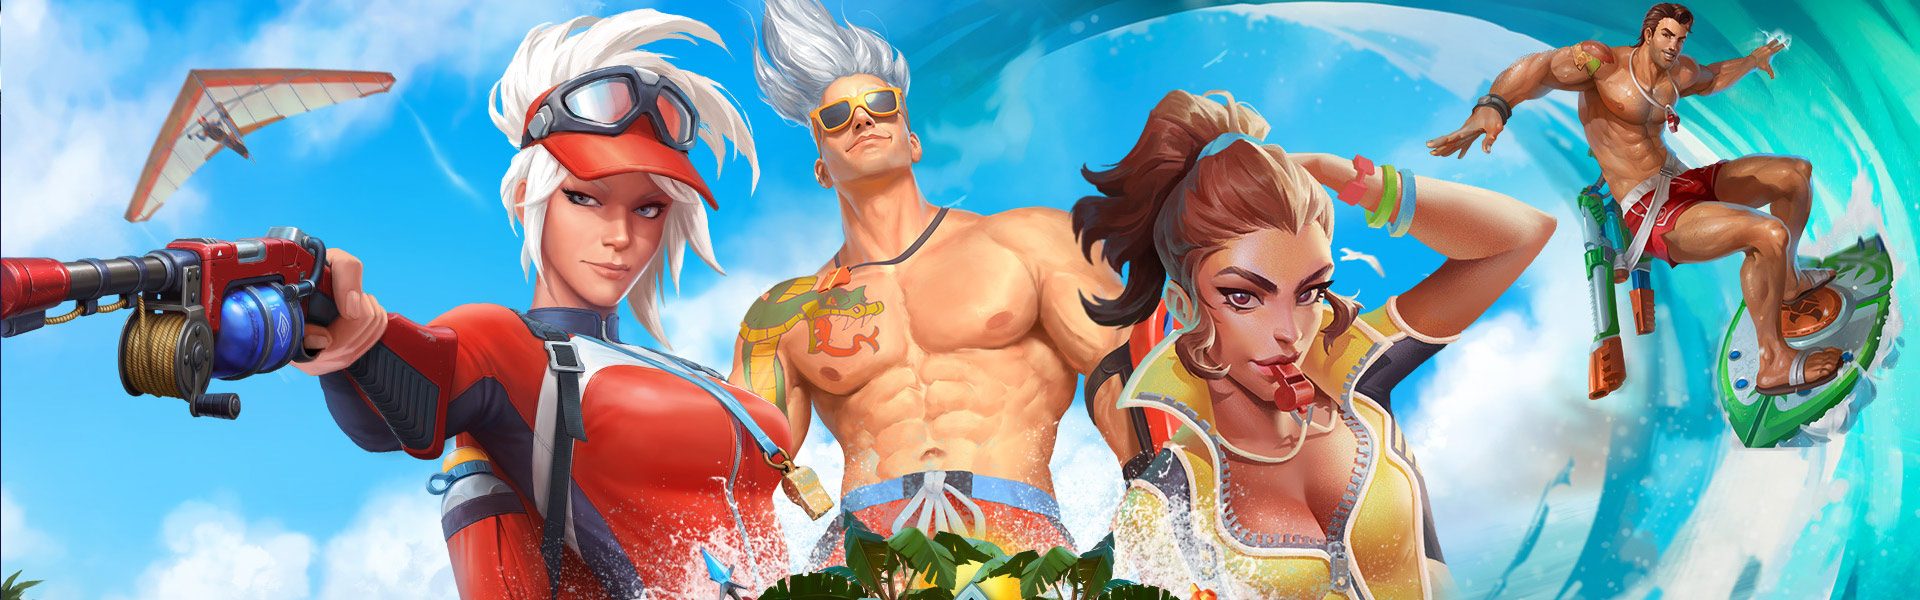 Team-based shooter Paladins launches Shore Patrol Battle Pass and ...